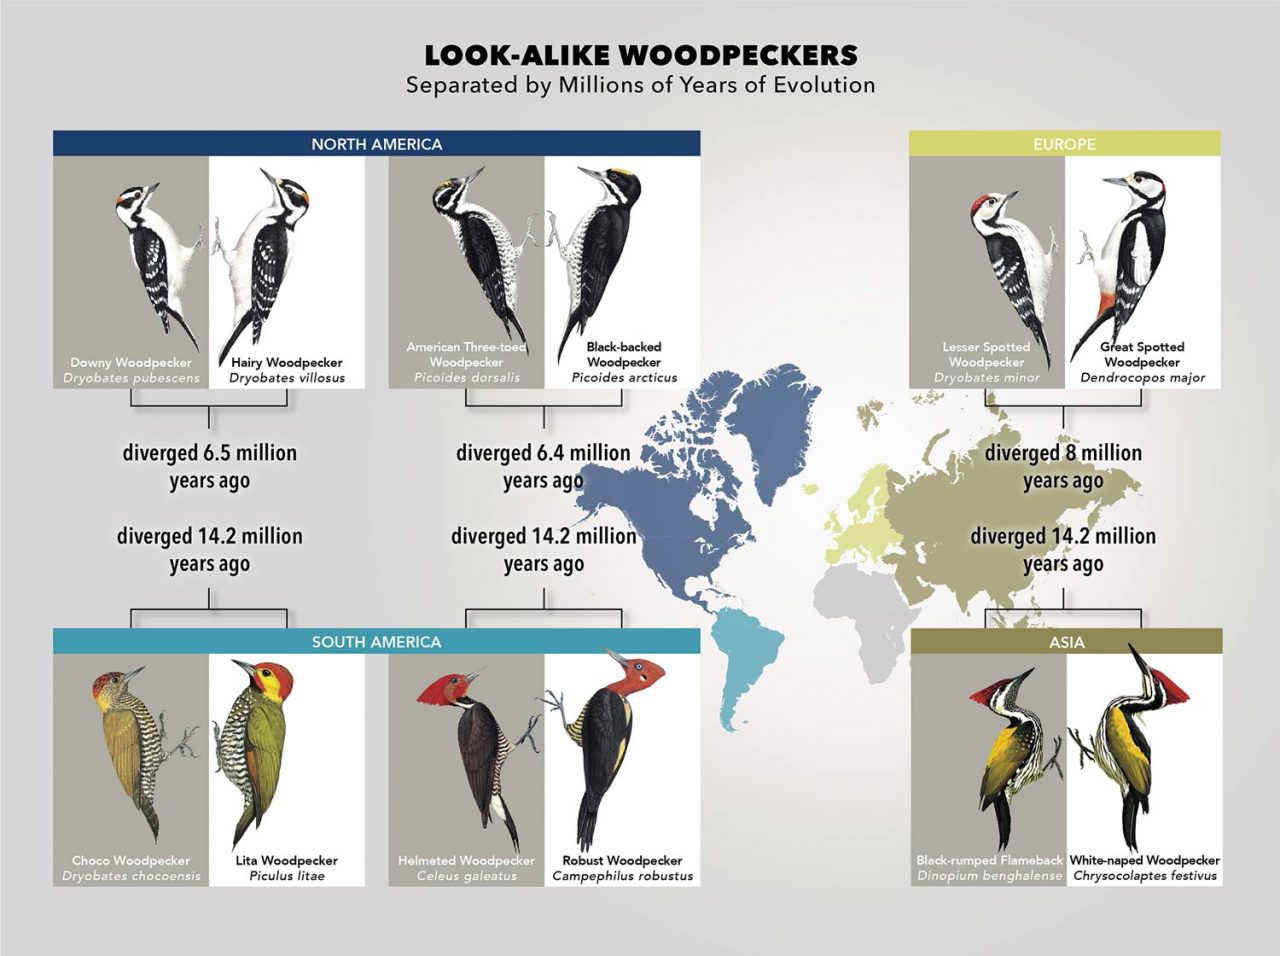 Around the world there are several pairs of woodpeckers that look alike but aren’t closely related. Research led by the Cornell Lab of Ornithology’s Eliot Miller documented this doppelganger phenomenon around the world among pairs of woodpecker species that genetically diverged millions of year ago. Miller says the mechanism is plumage mimicry—one species evolving to look like another in order to gain some benefit. In the case of smaller-sized doppelgangers, they may be evolving to look like their bigger twins so that they can gain some of the dominance benefits associated with a larger, more aggressive bird. Graphic by Jillian Ditner/Cornell Lab of Ornithology; bird illustrations courtesy of Handbook of Birds of the World Alive, Lynx Editions